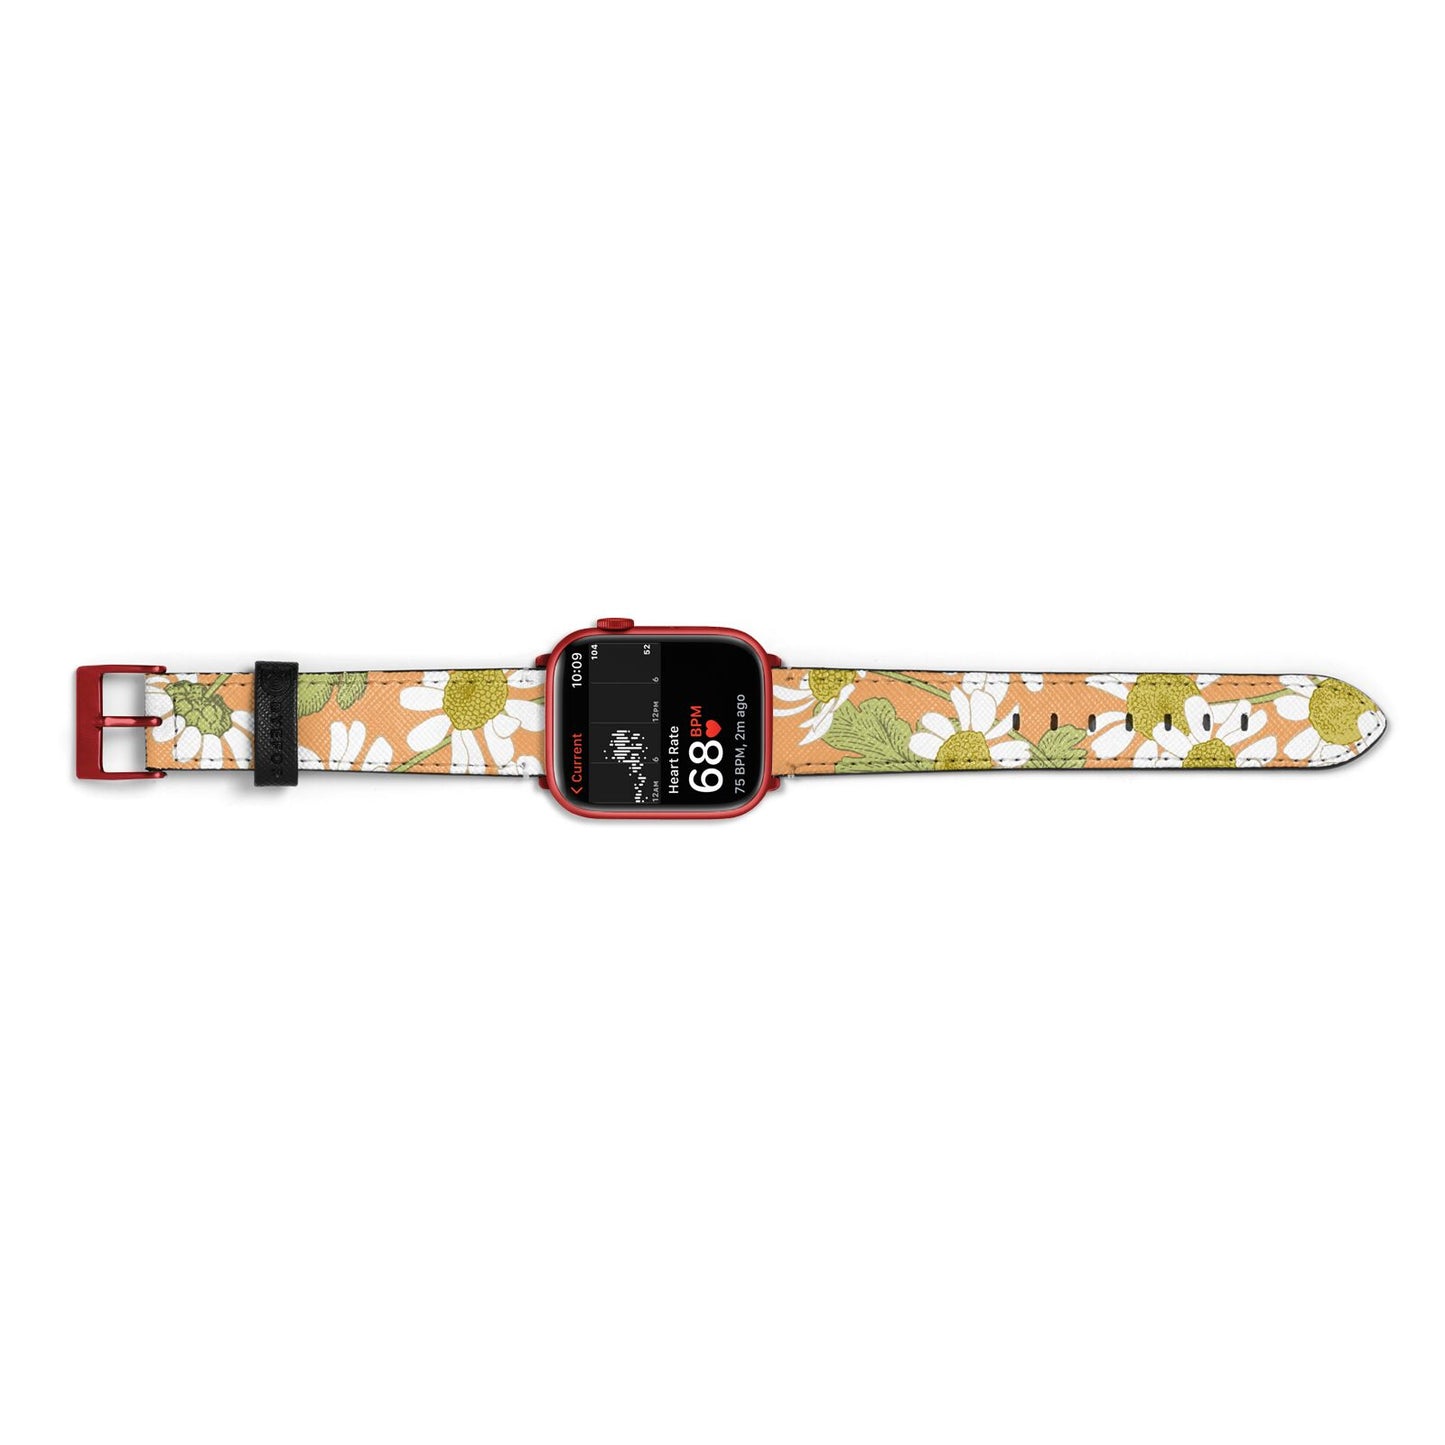 Daisies Apple Watch Strap Size 38mm Landscape Image Red Hardware